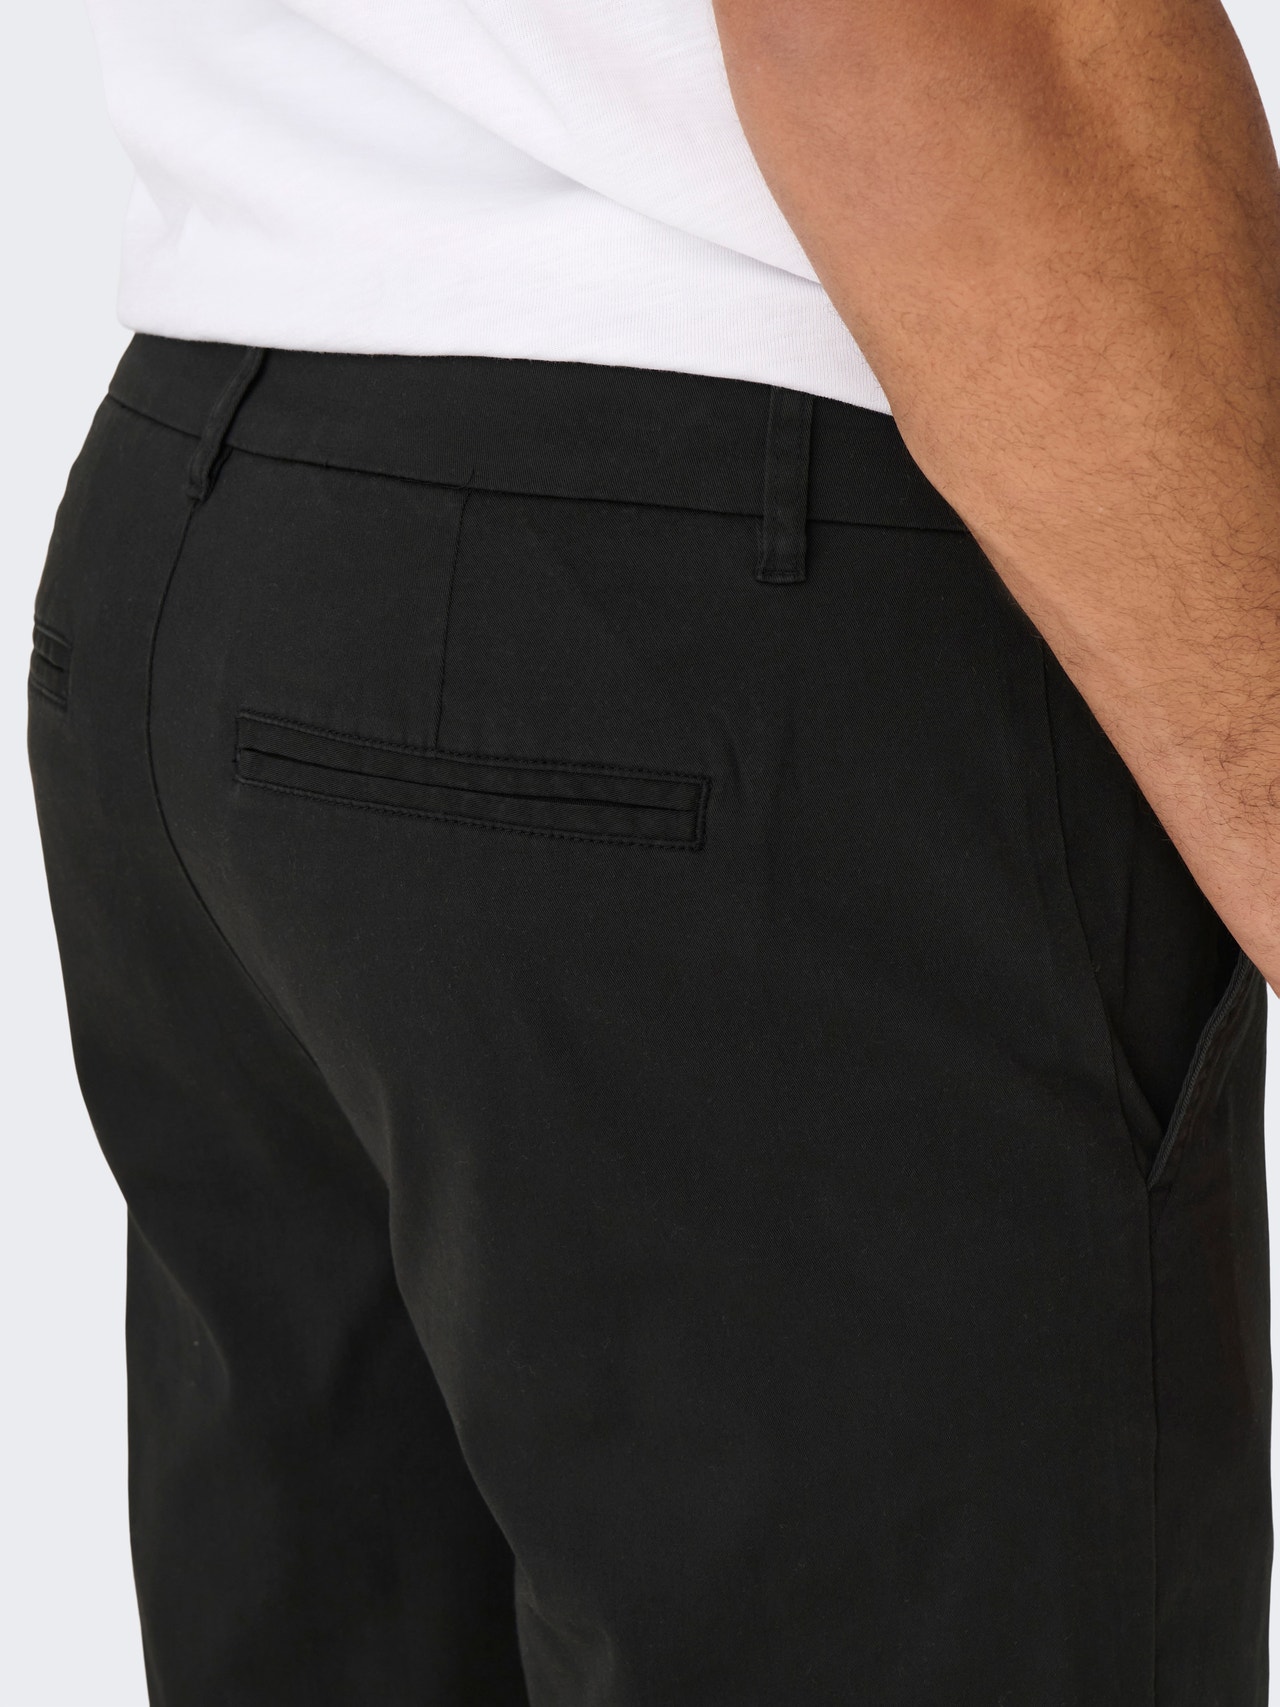 ONLY & SONS Pantalones Corte tapered Talle medio -Black - 22026225